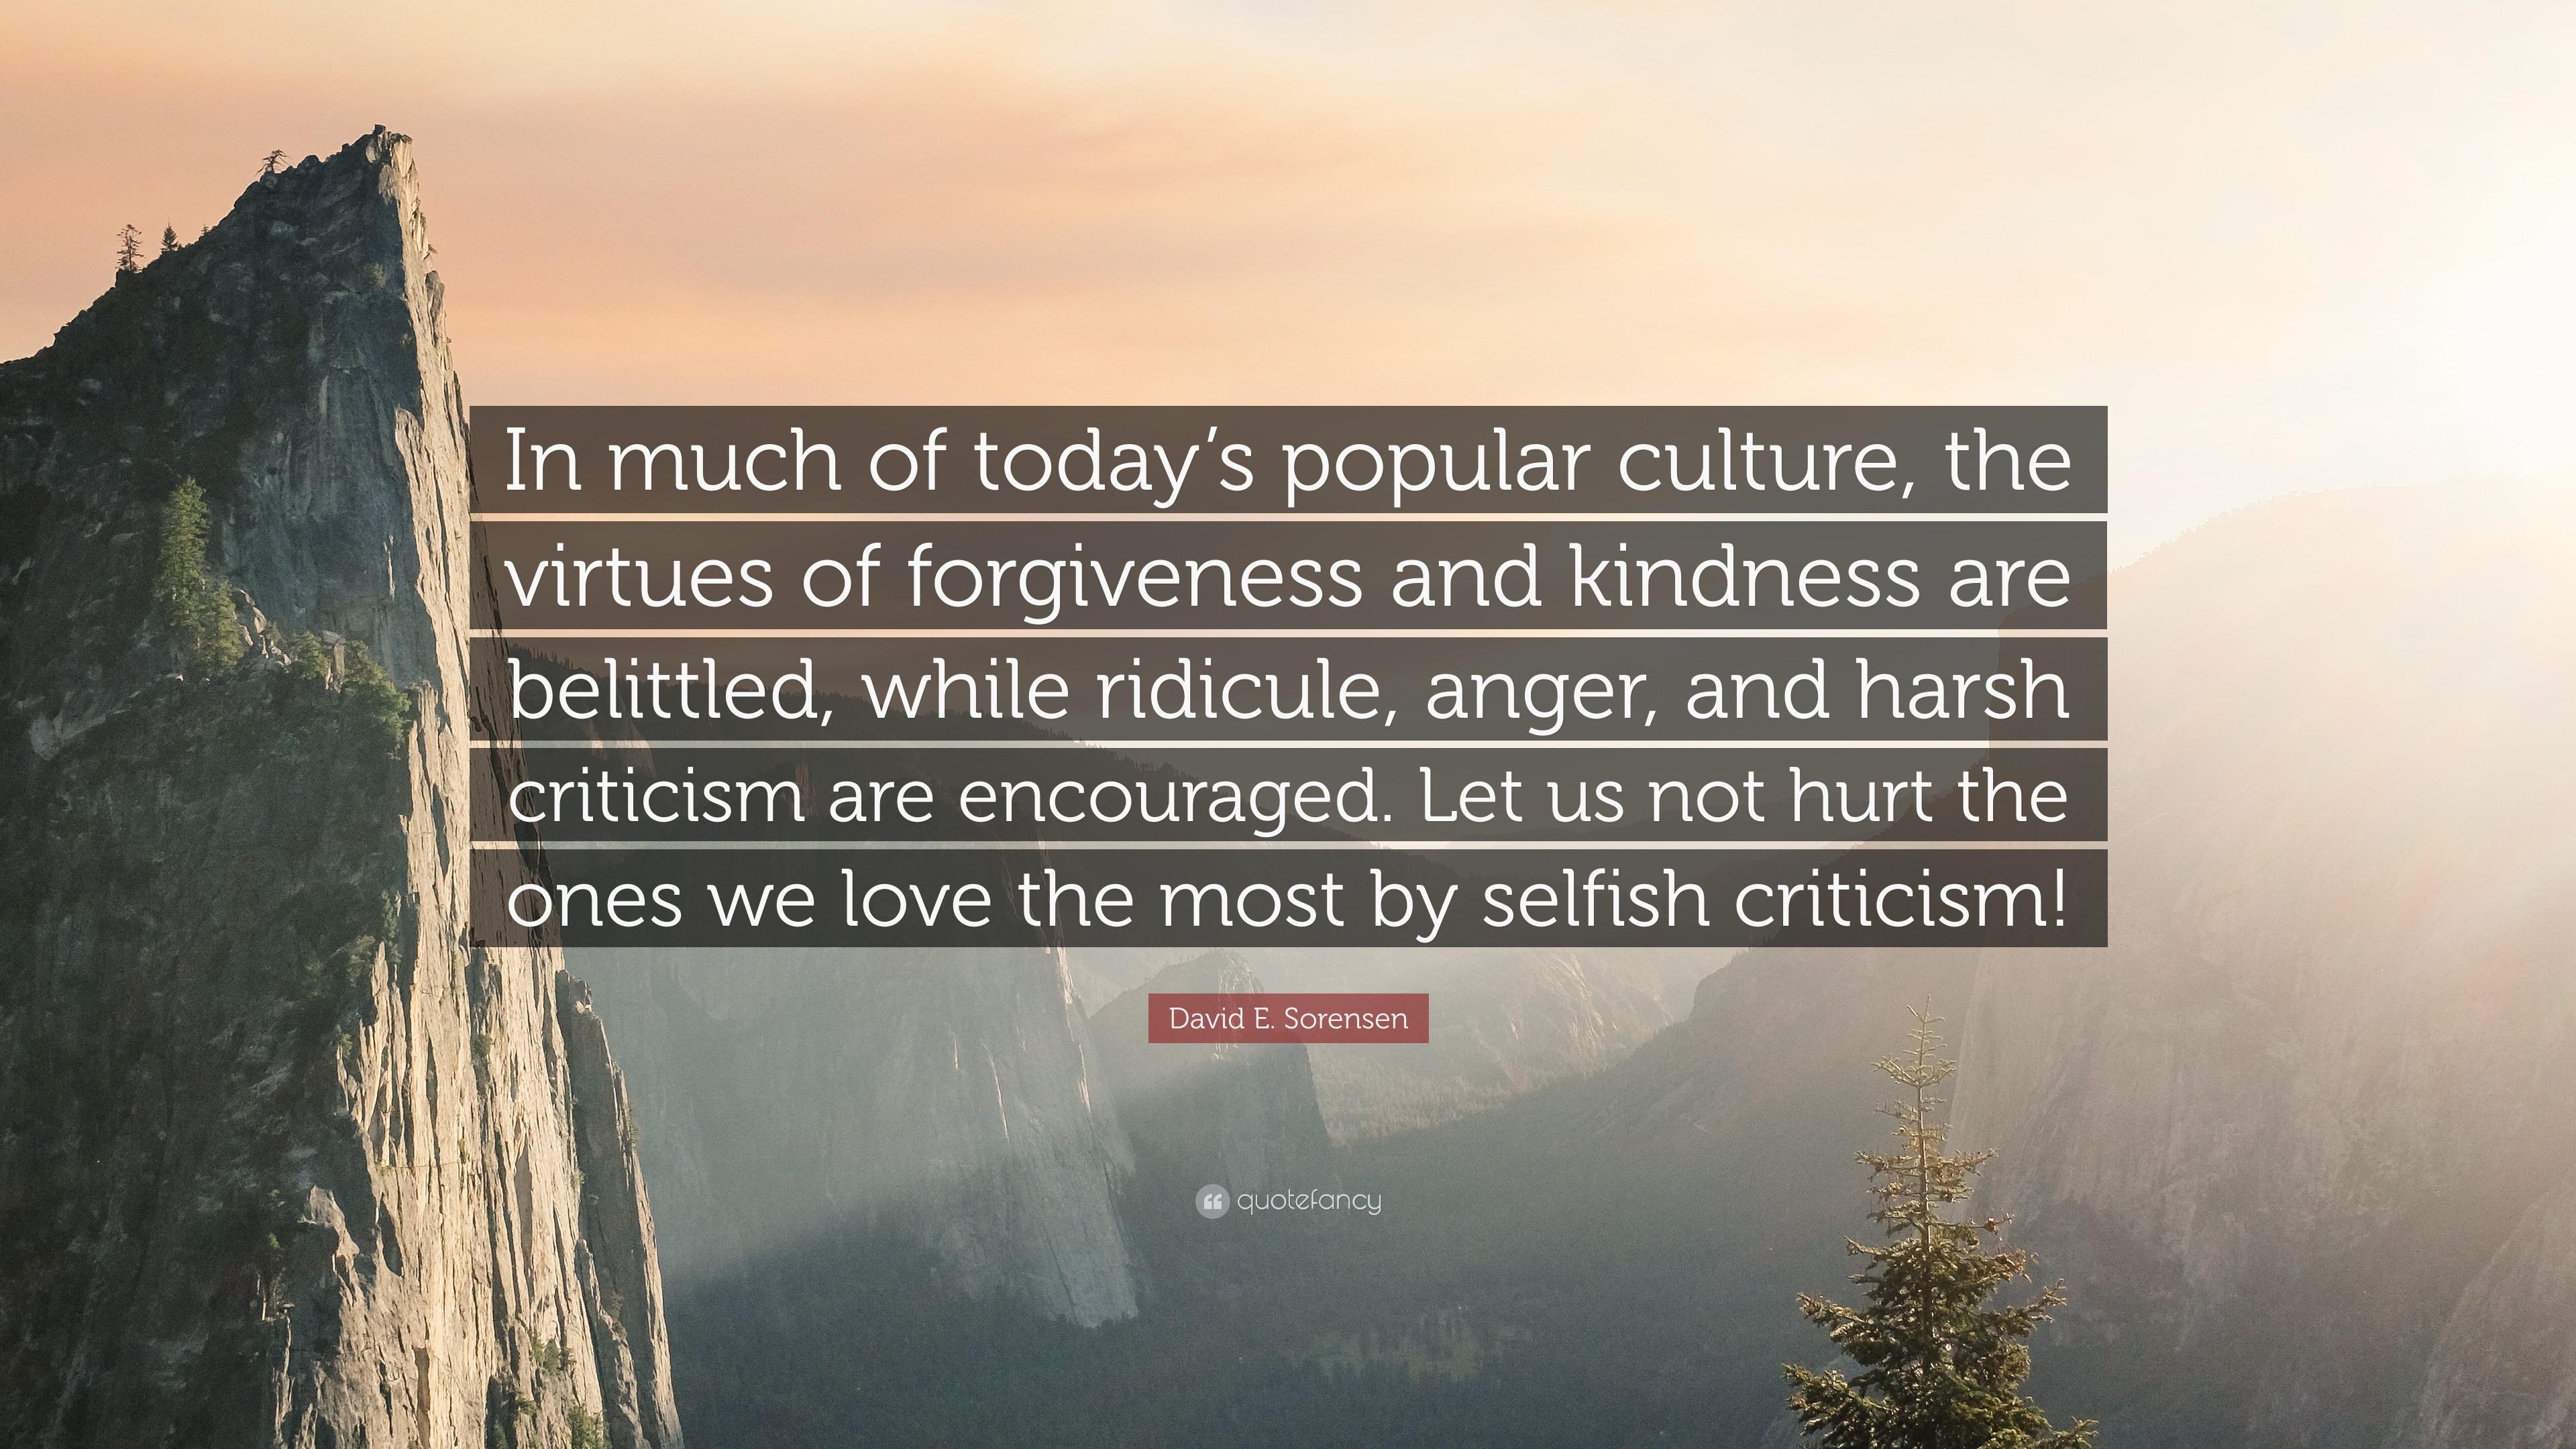 David E Sorensen Quote “In much of today s popular culture the virtues